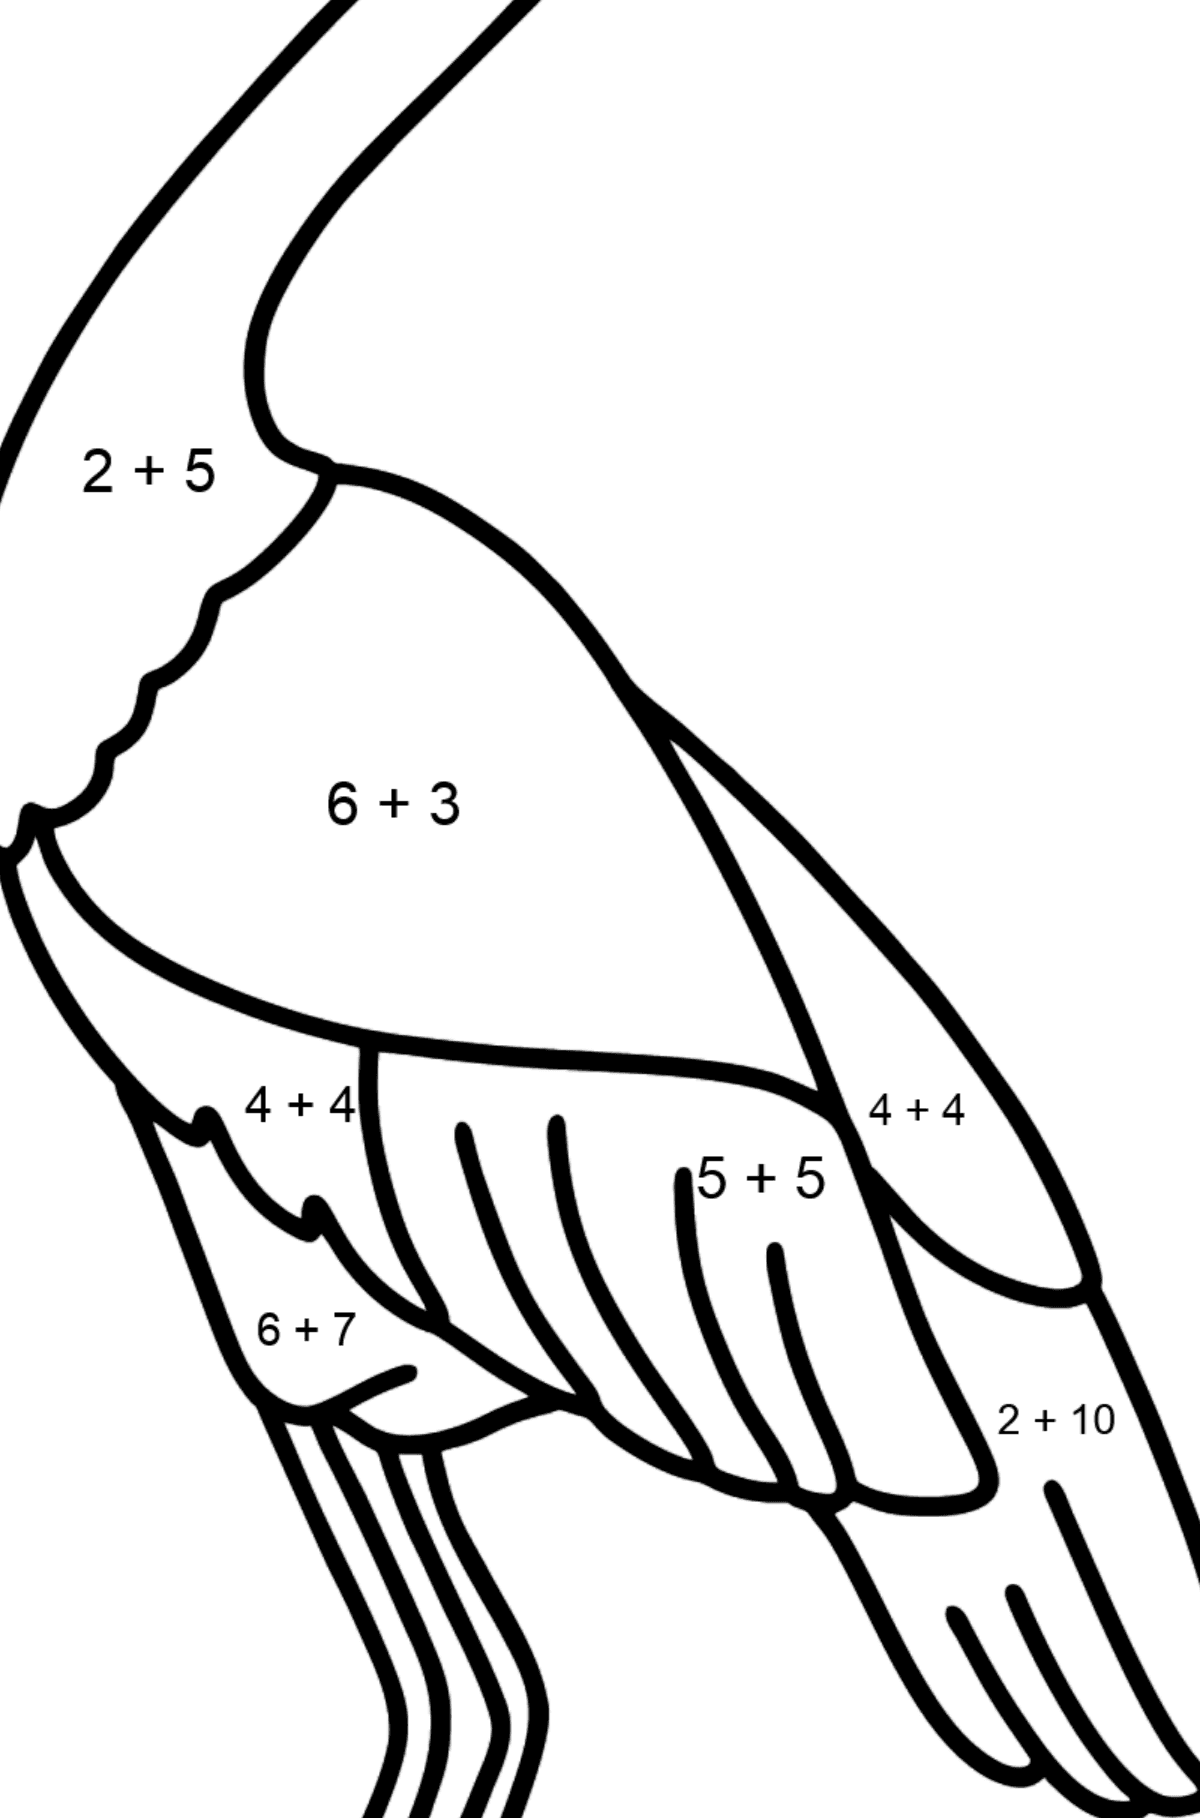 Stork coloring page - Math Coloring - Addition for Kids